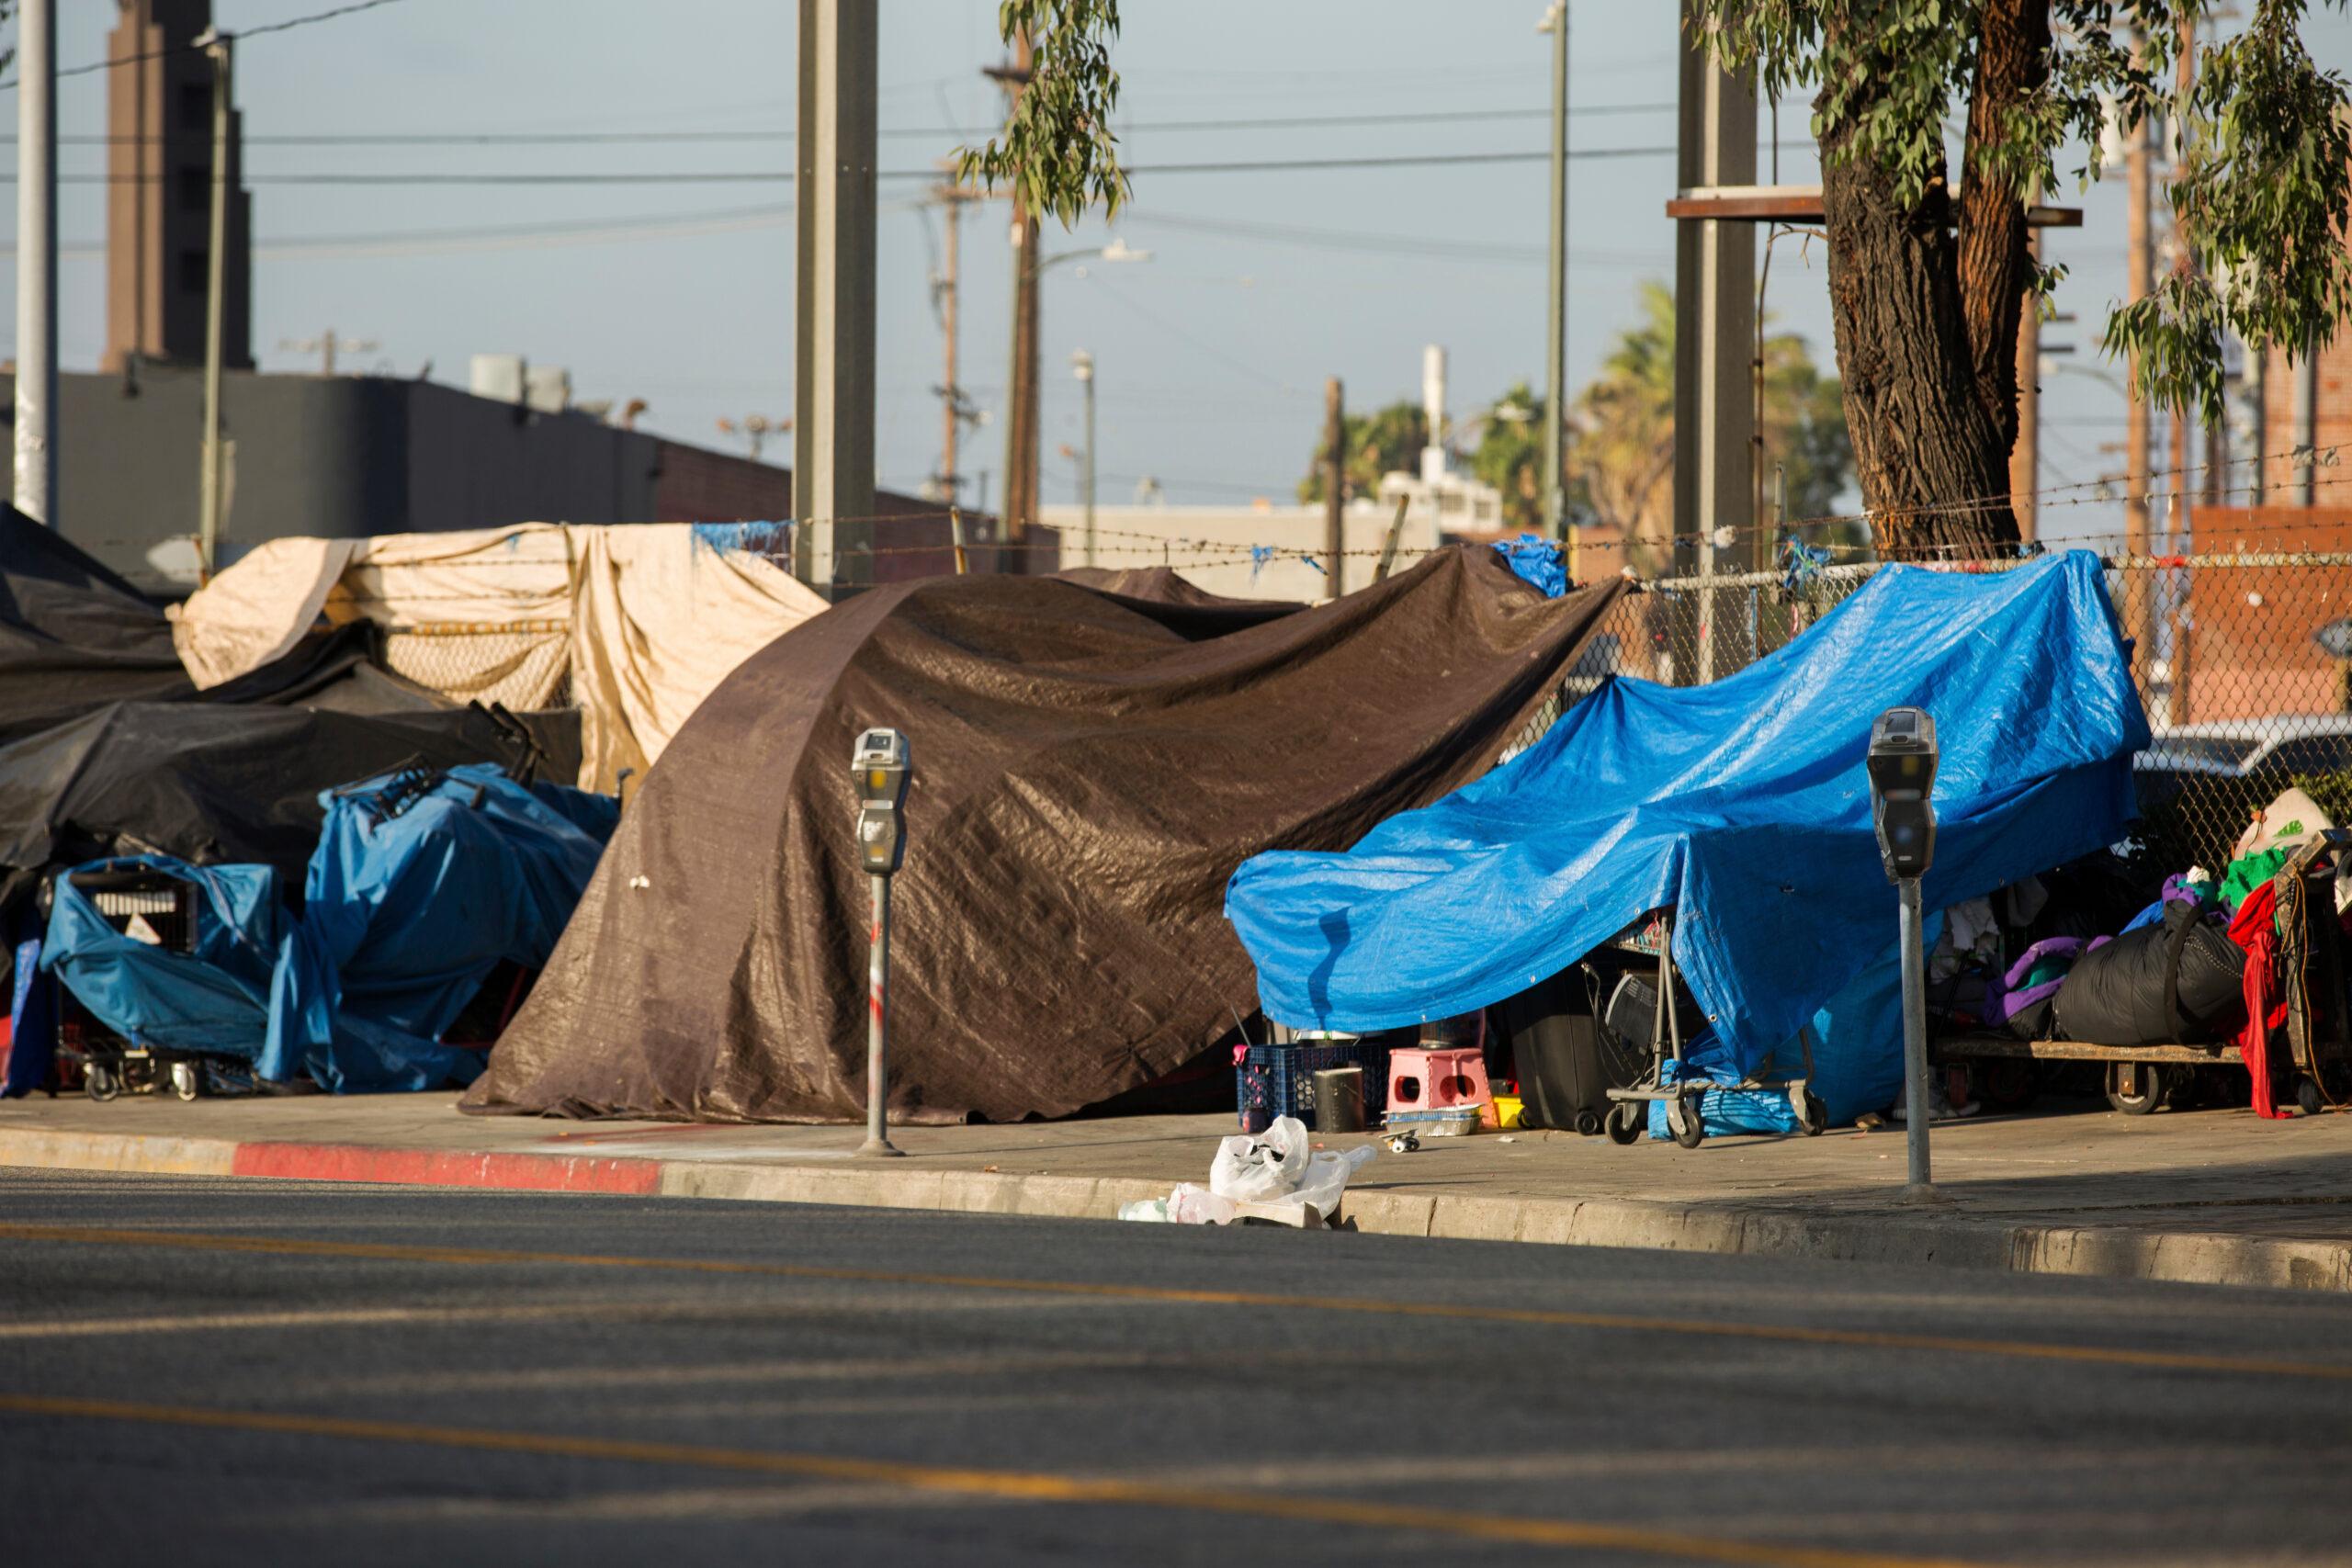 View,Of,The,Homeless,Encampments,Along,Central,Avenue,In,Downtown